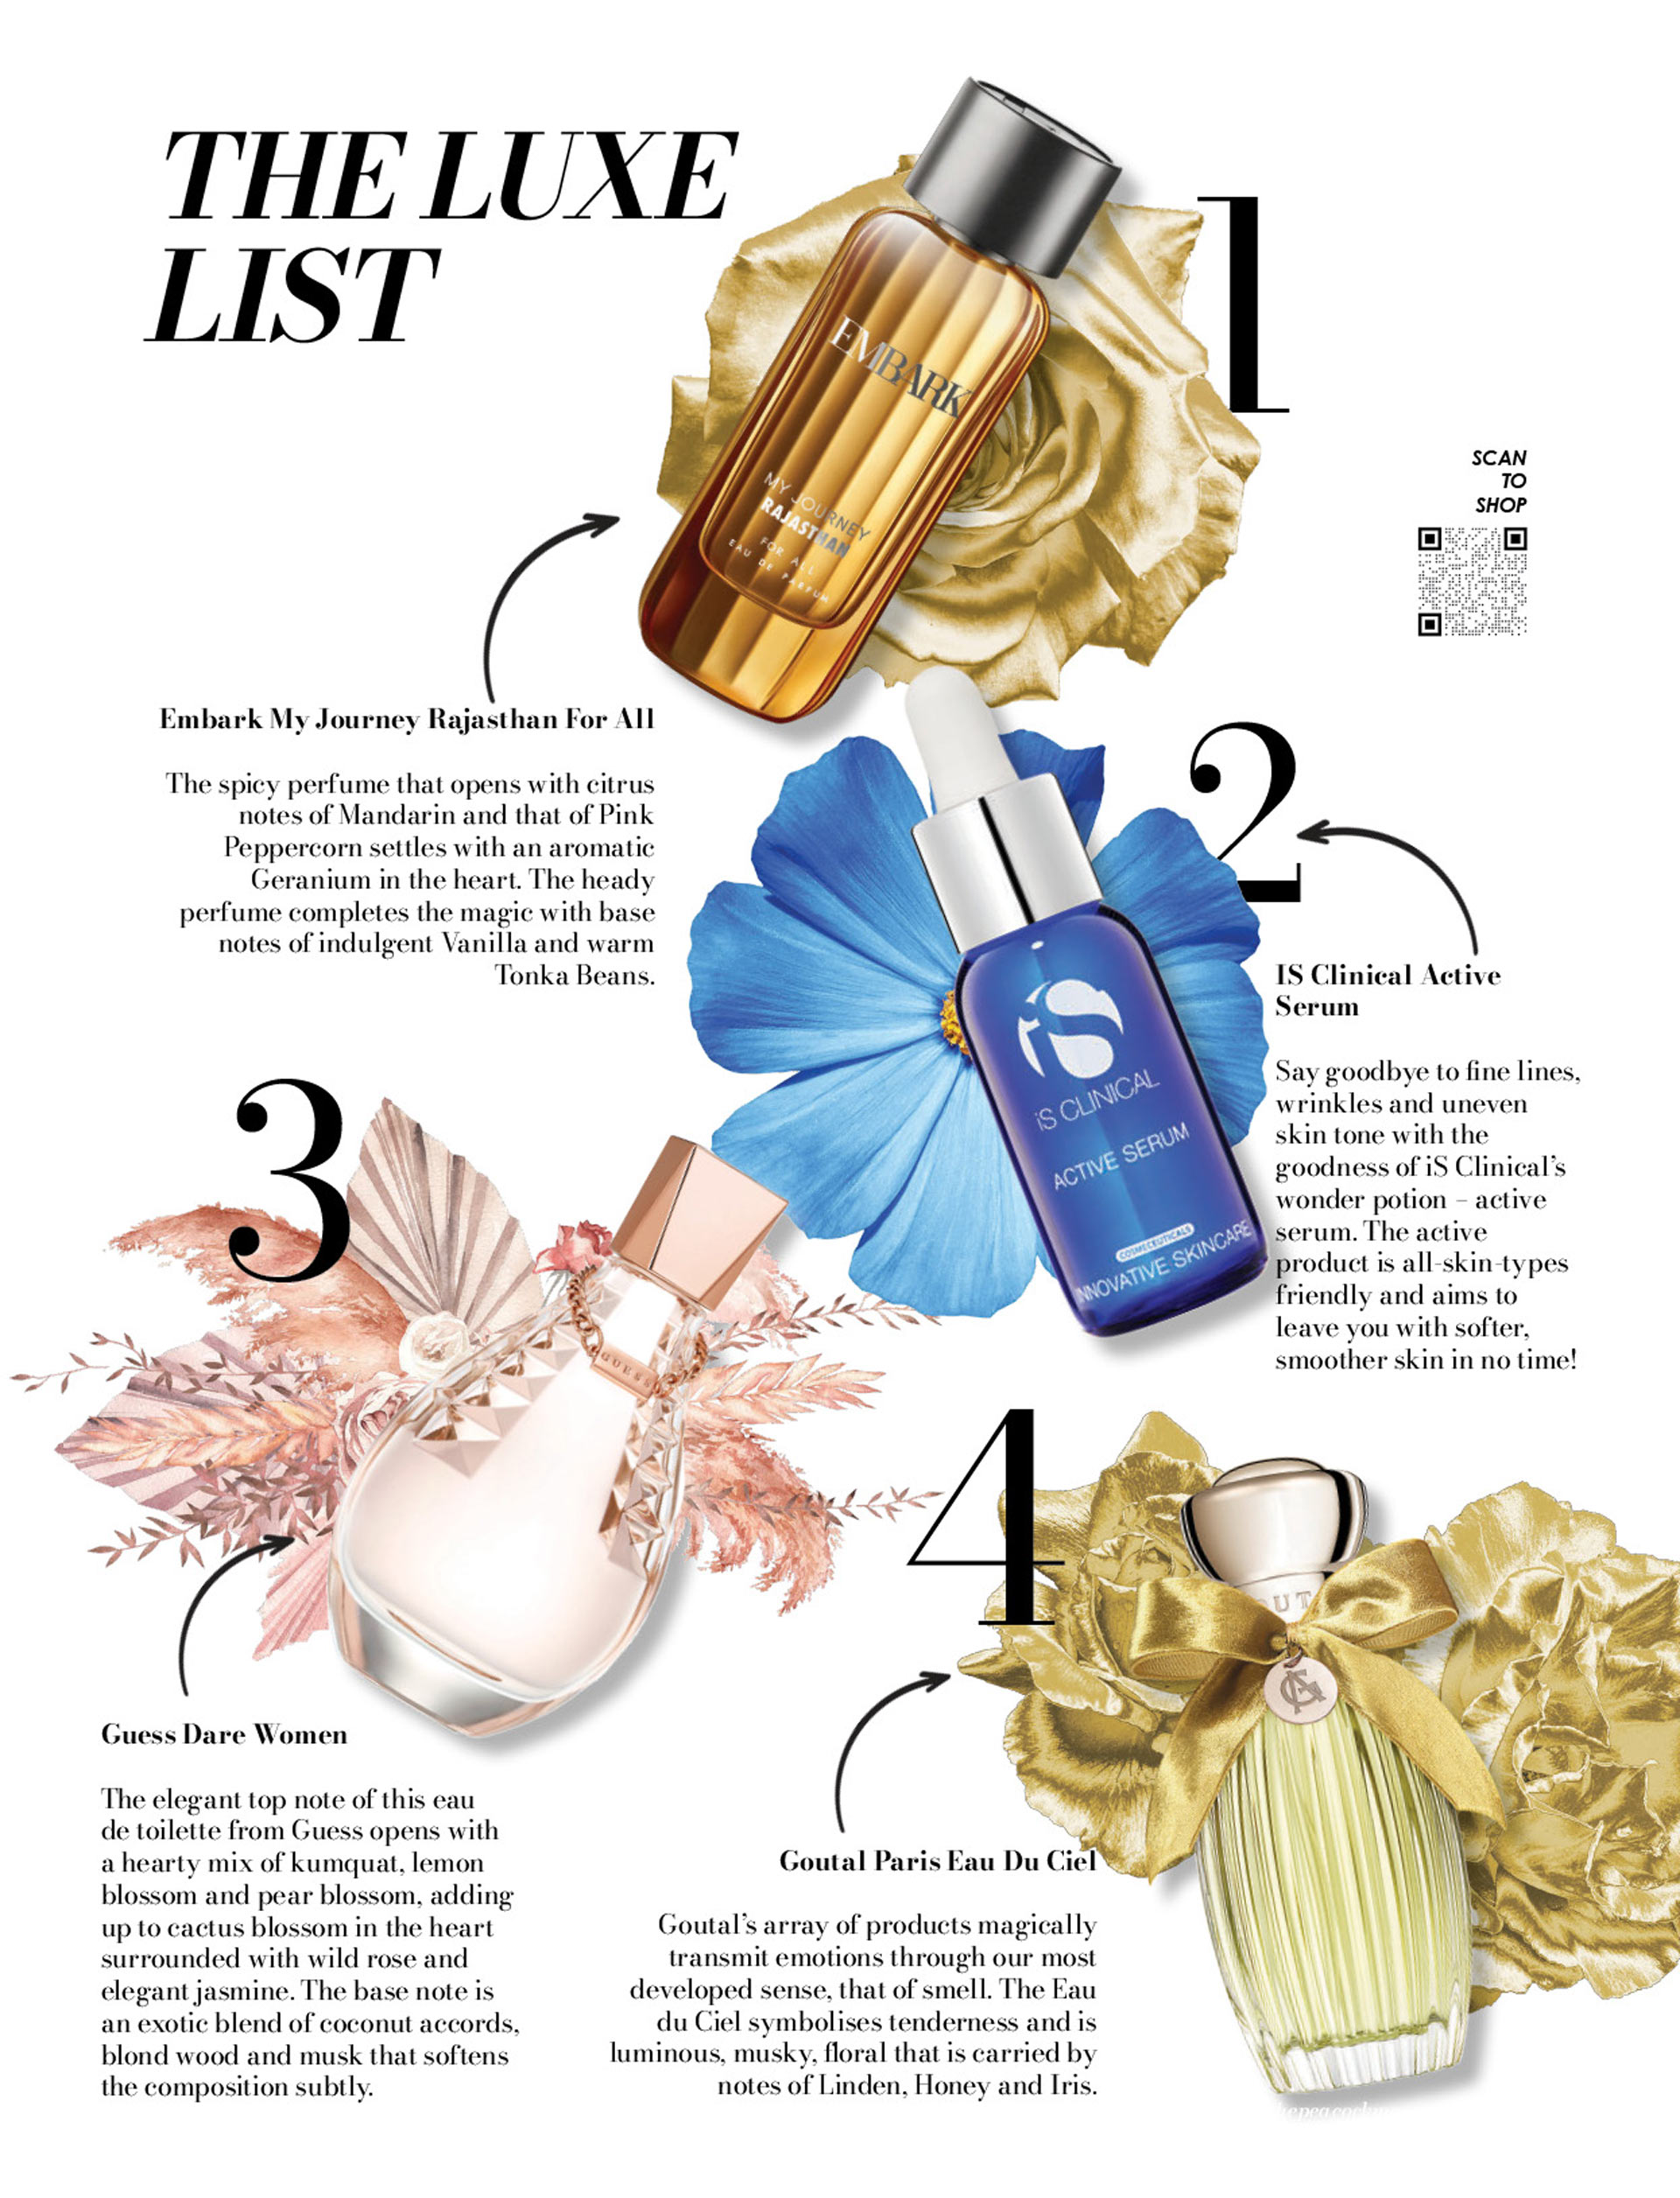 THE LUXE LIST